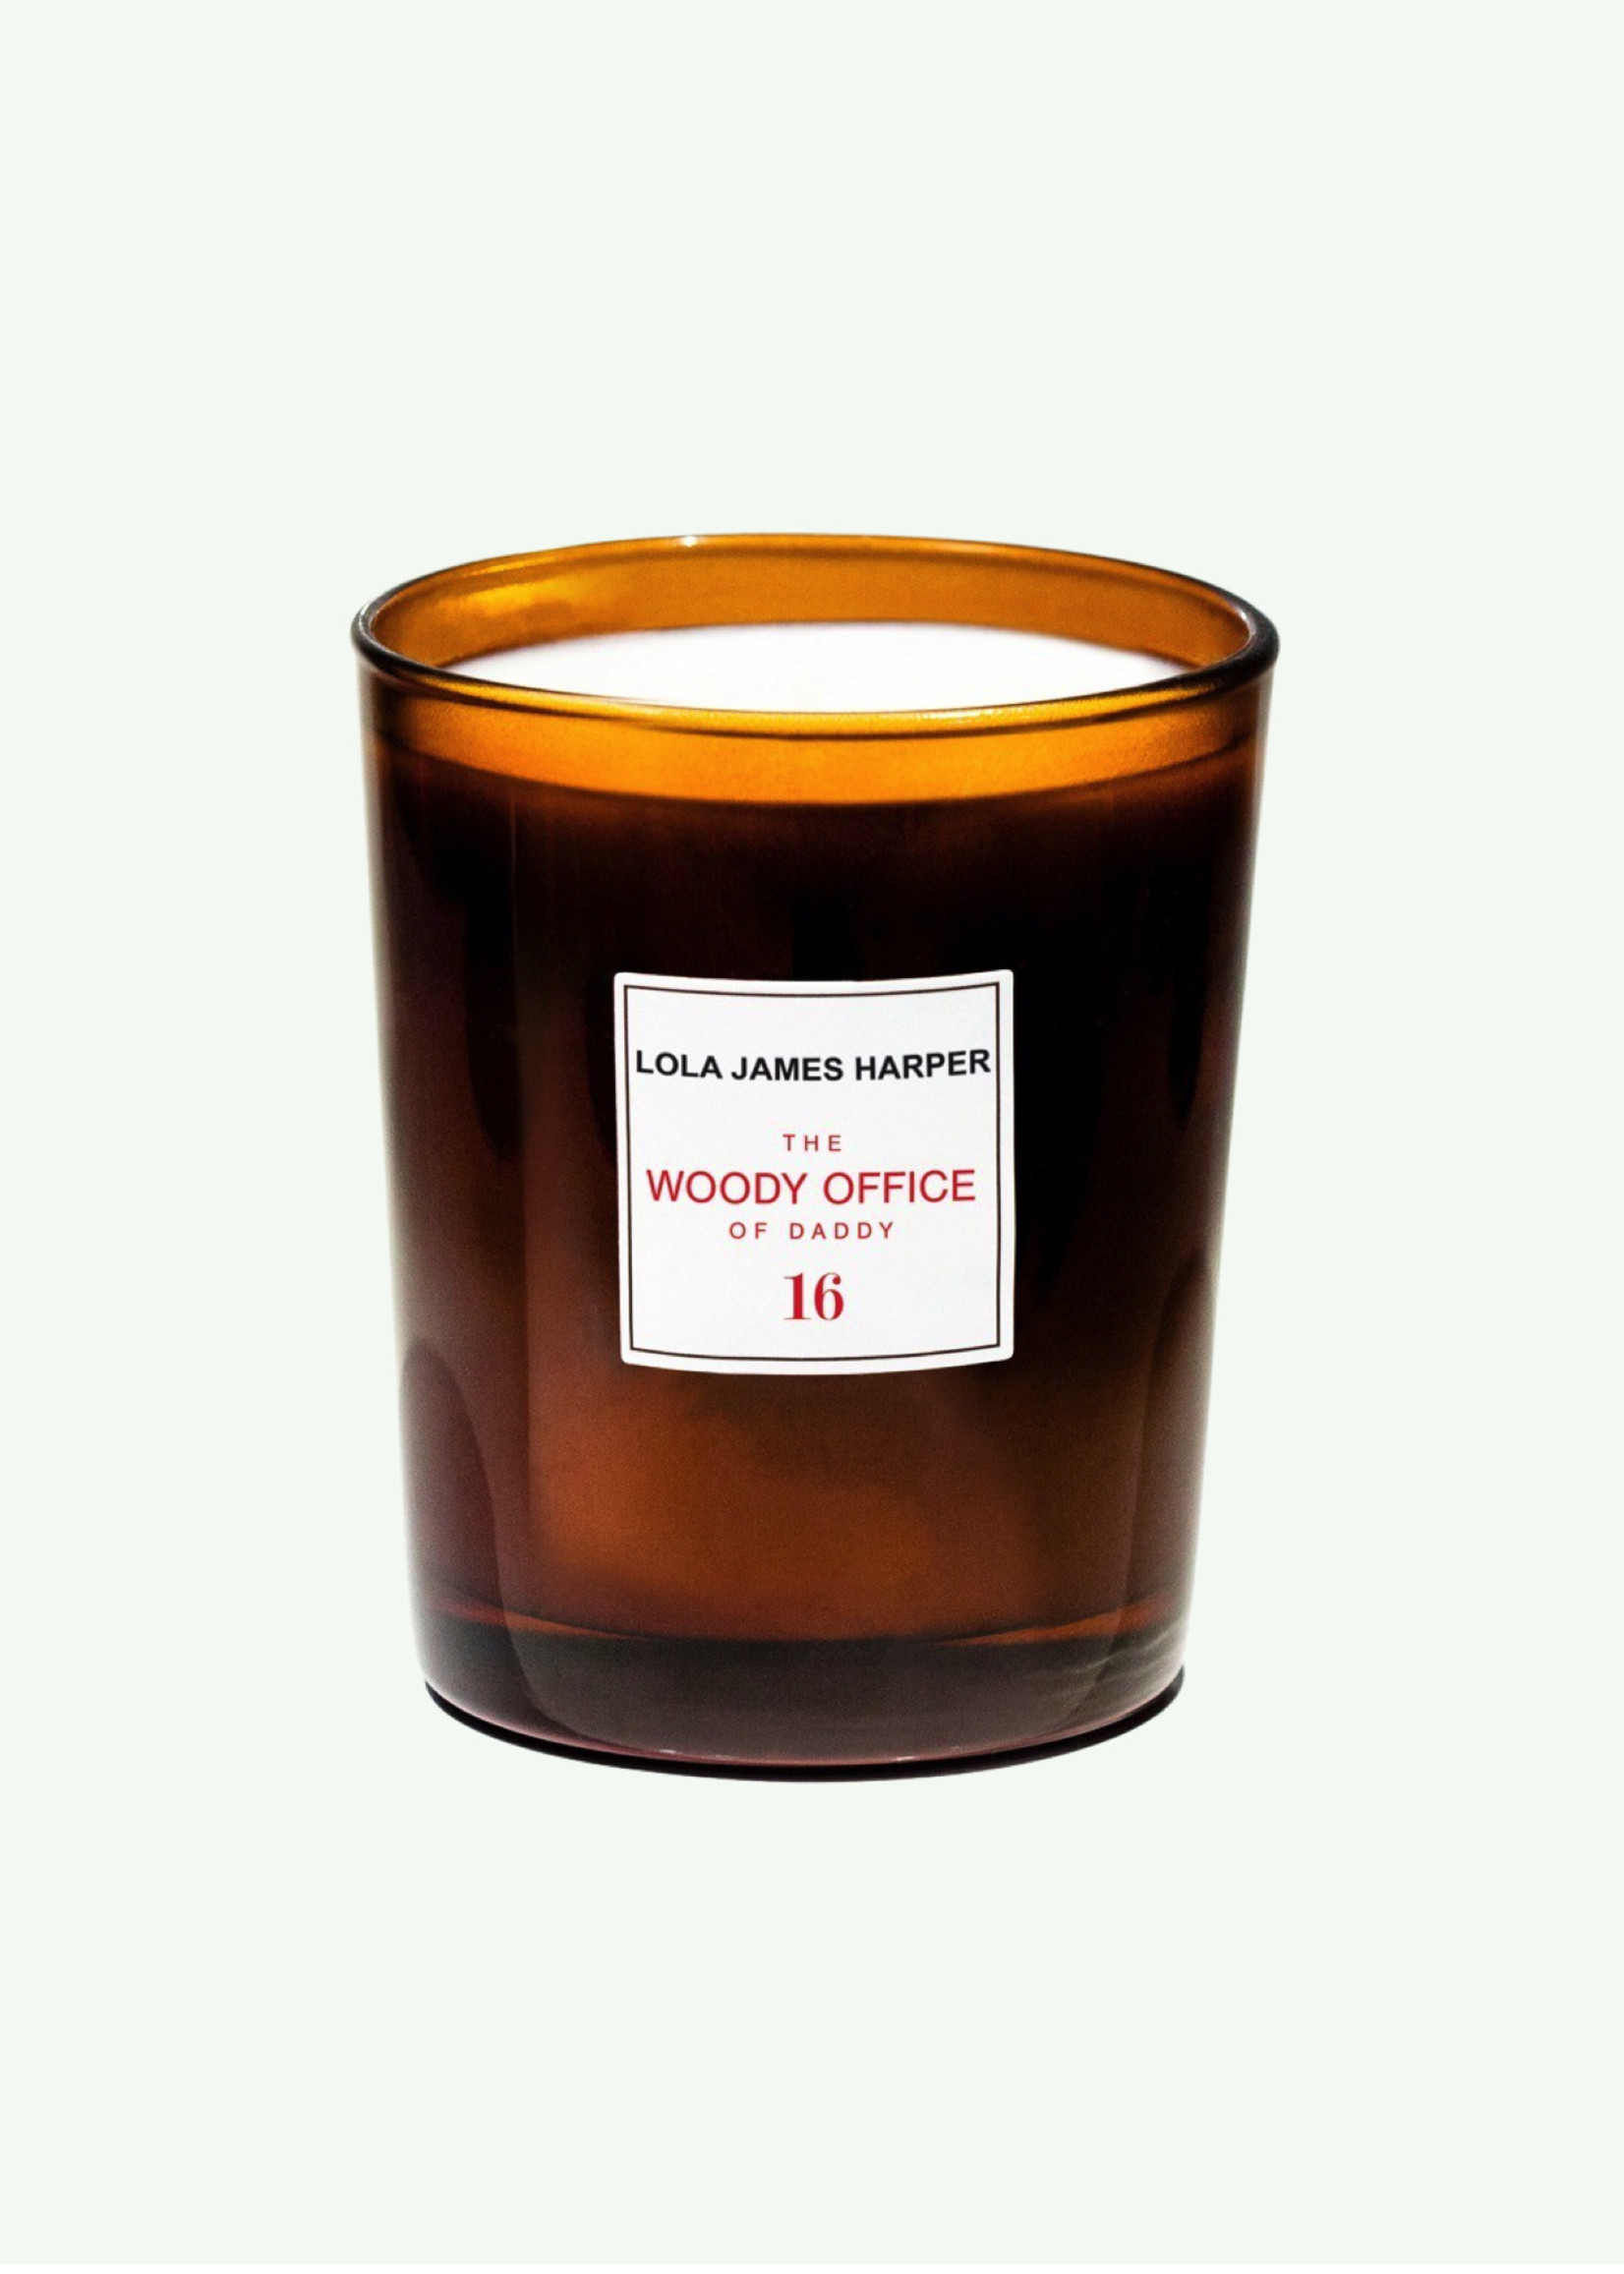 Lola James Harper The Woody Office of Daddy - Bougie Parfumée 190 gr